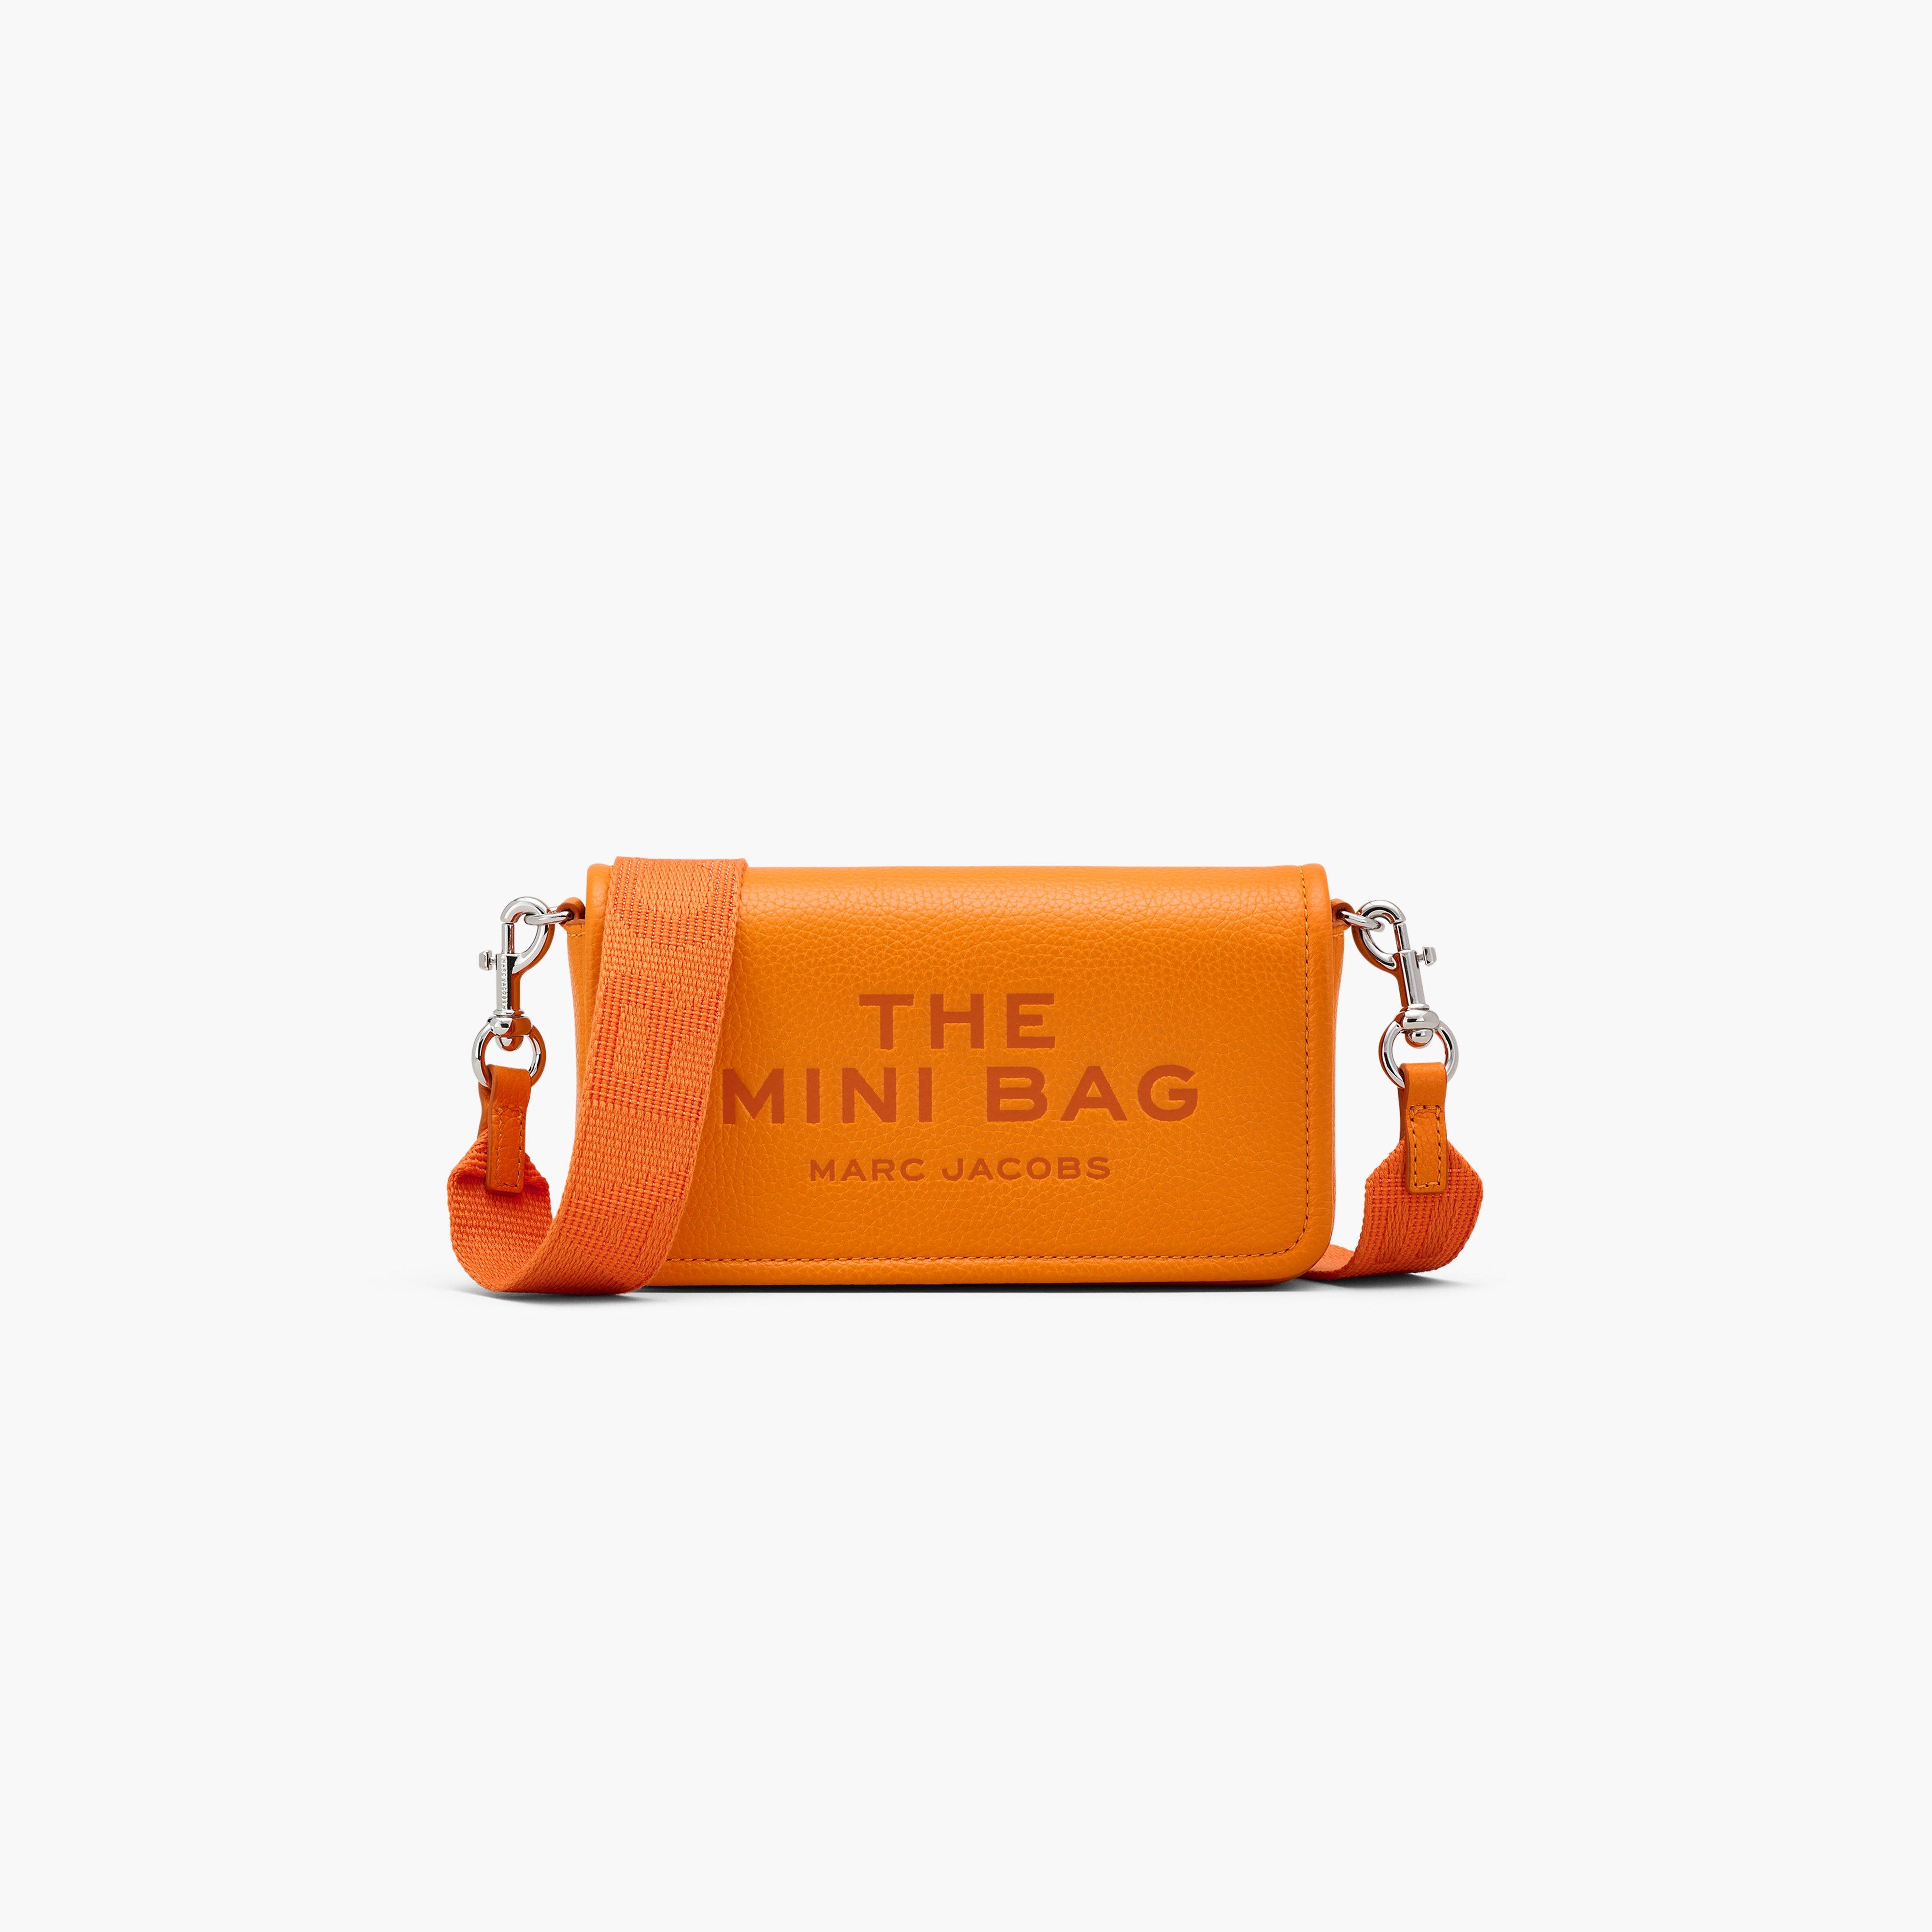 Marc by Marc jacobs The Leather Mini Bag,TANGERINE